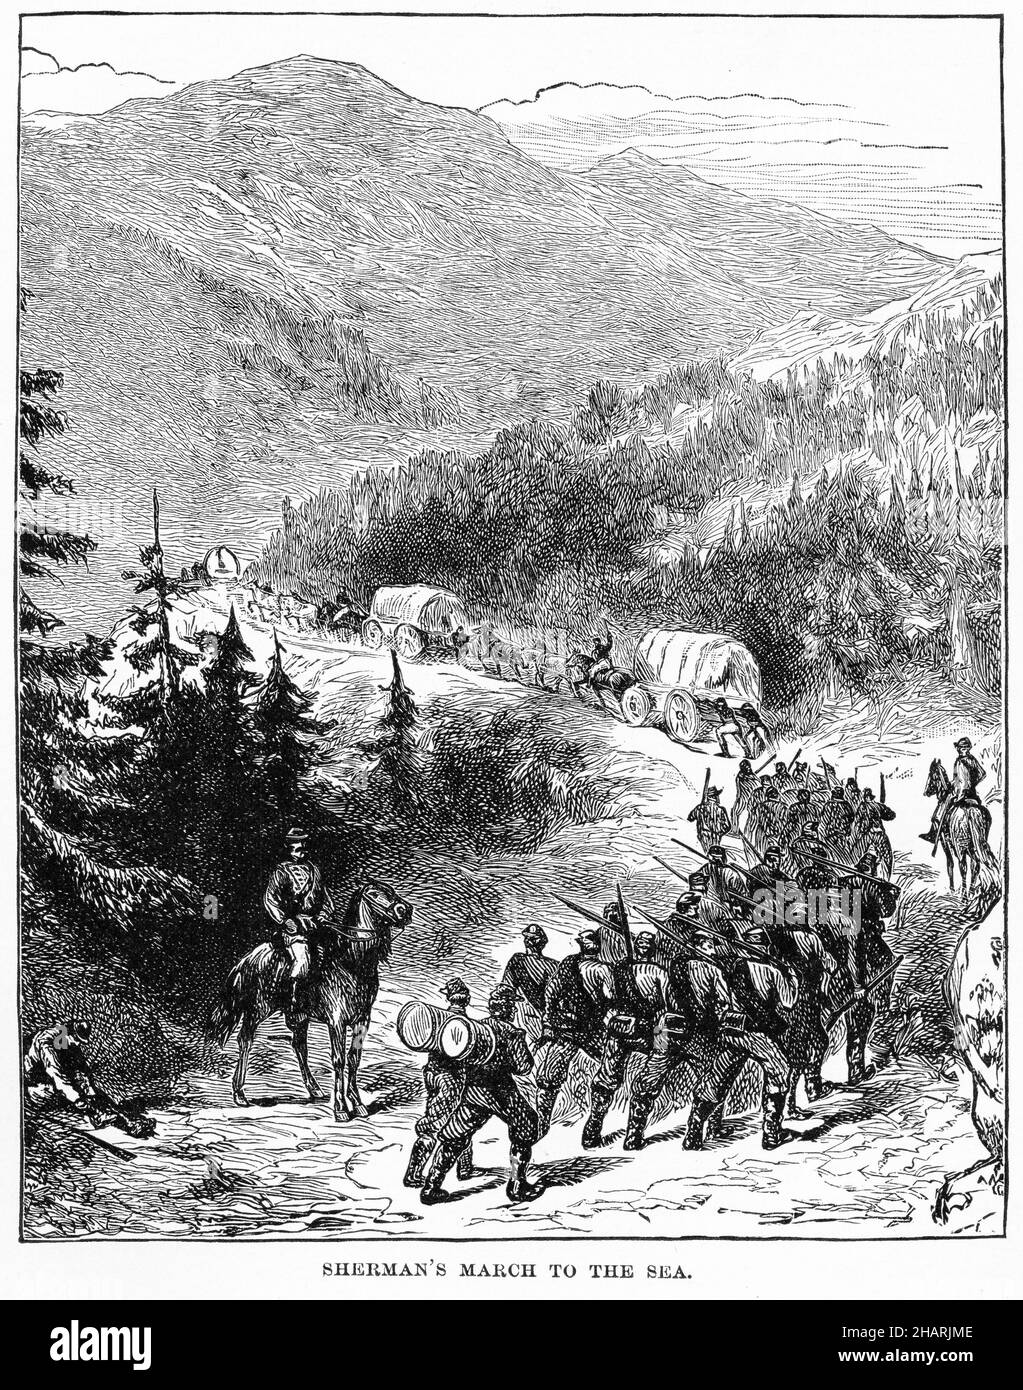 Engraving of Sherman's march to the sea during the American civil war: Stock Photo